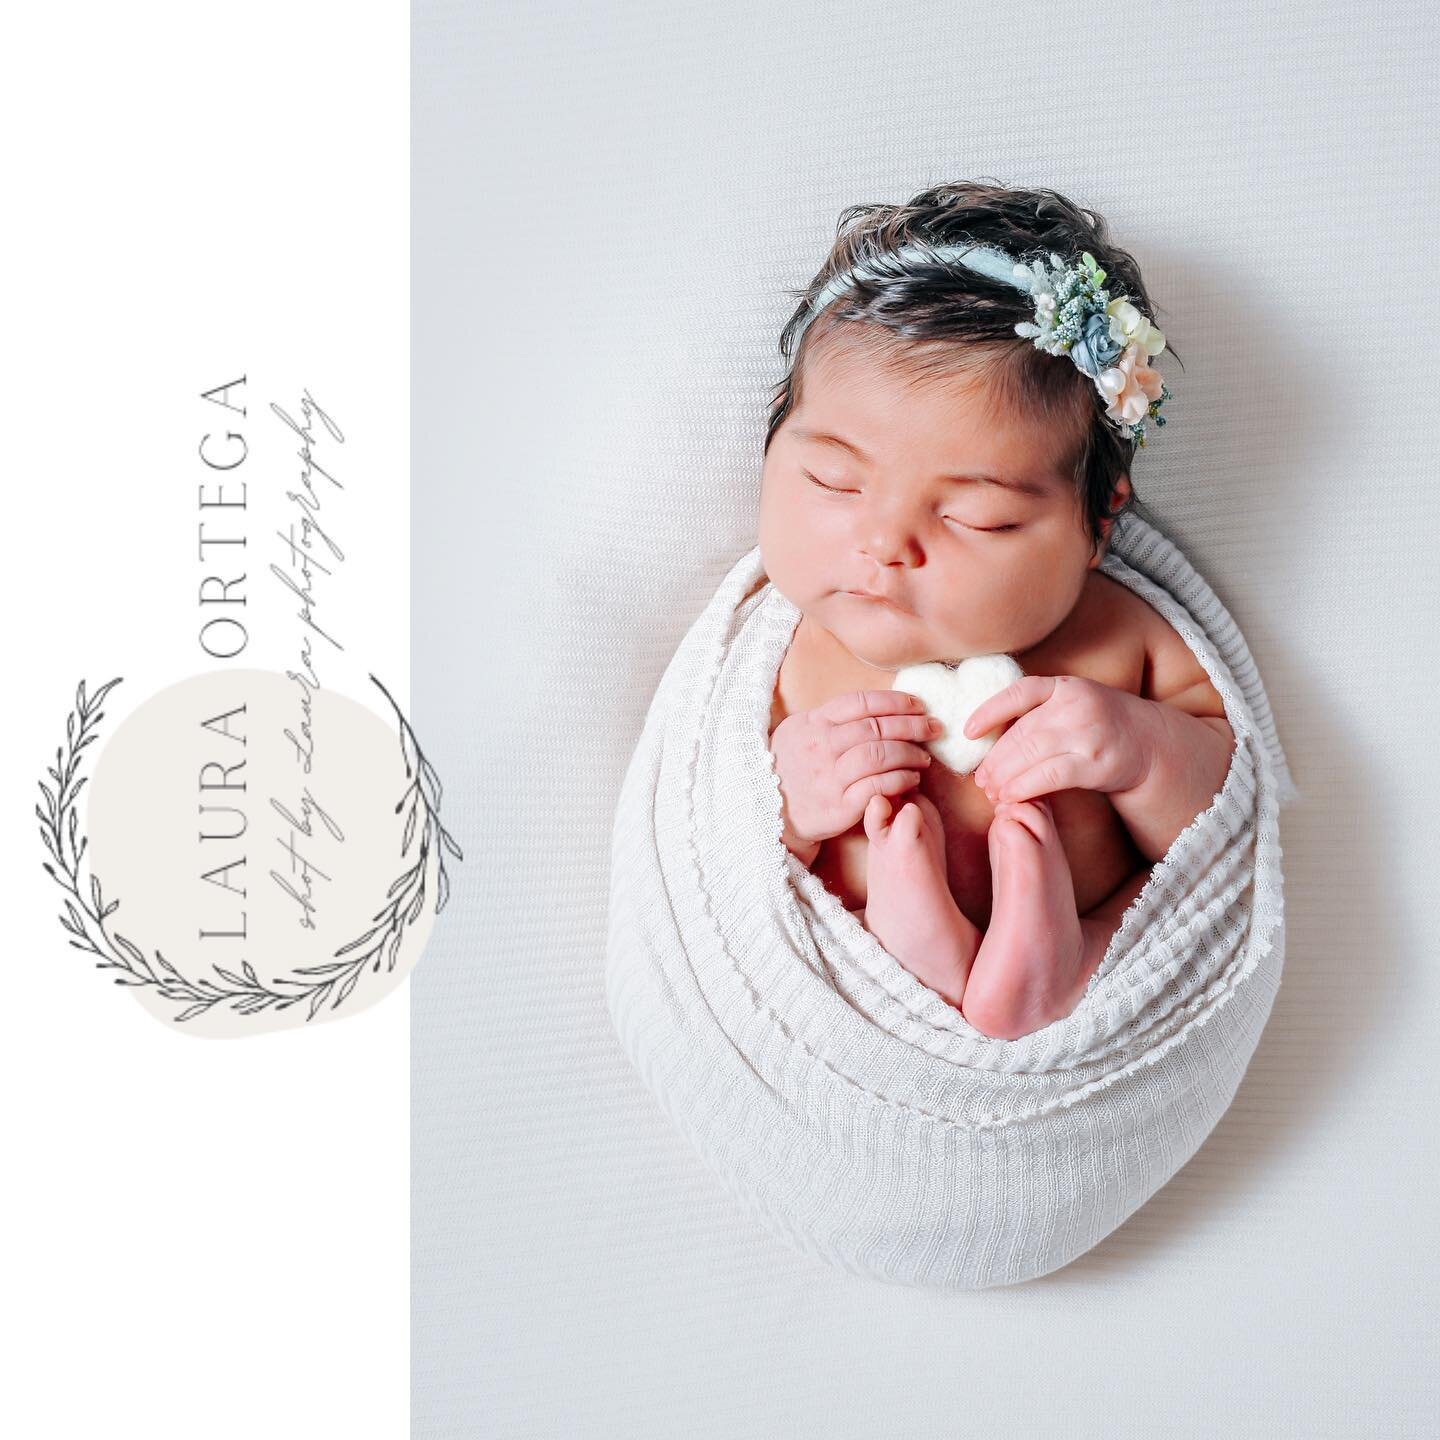 Such a blessing to be able to wrap a newborn baby and create this beautiful image you&rsquo;ll hold forever.

🤍
.
.
.
#newborn #newbornphotographer #babysafeposing #weeksoldbaby #newbornsessionsathome #travelphotographer #pomonaca #instagram #photos